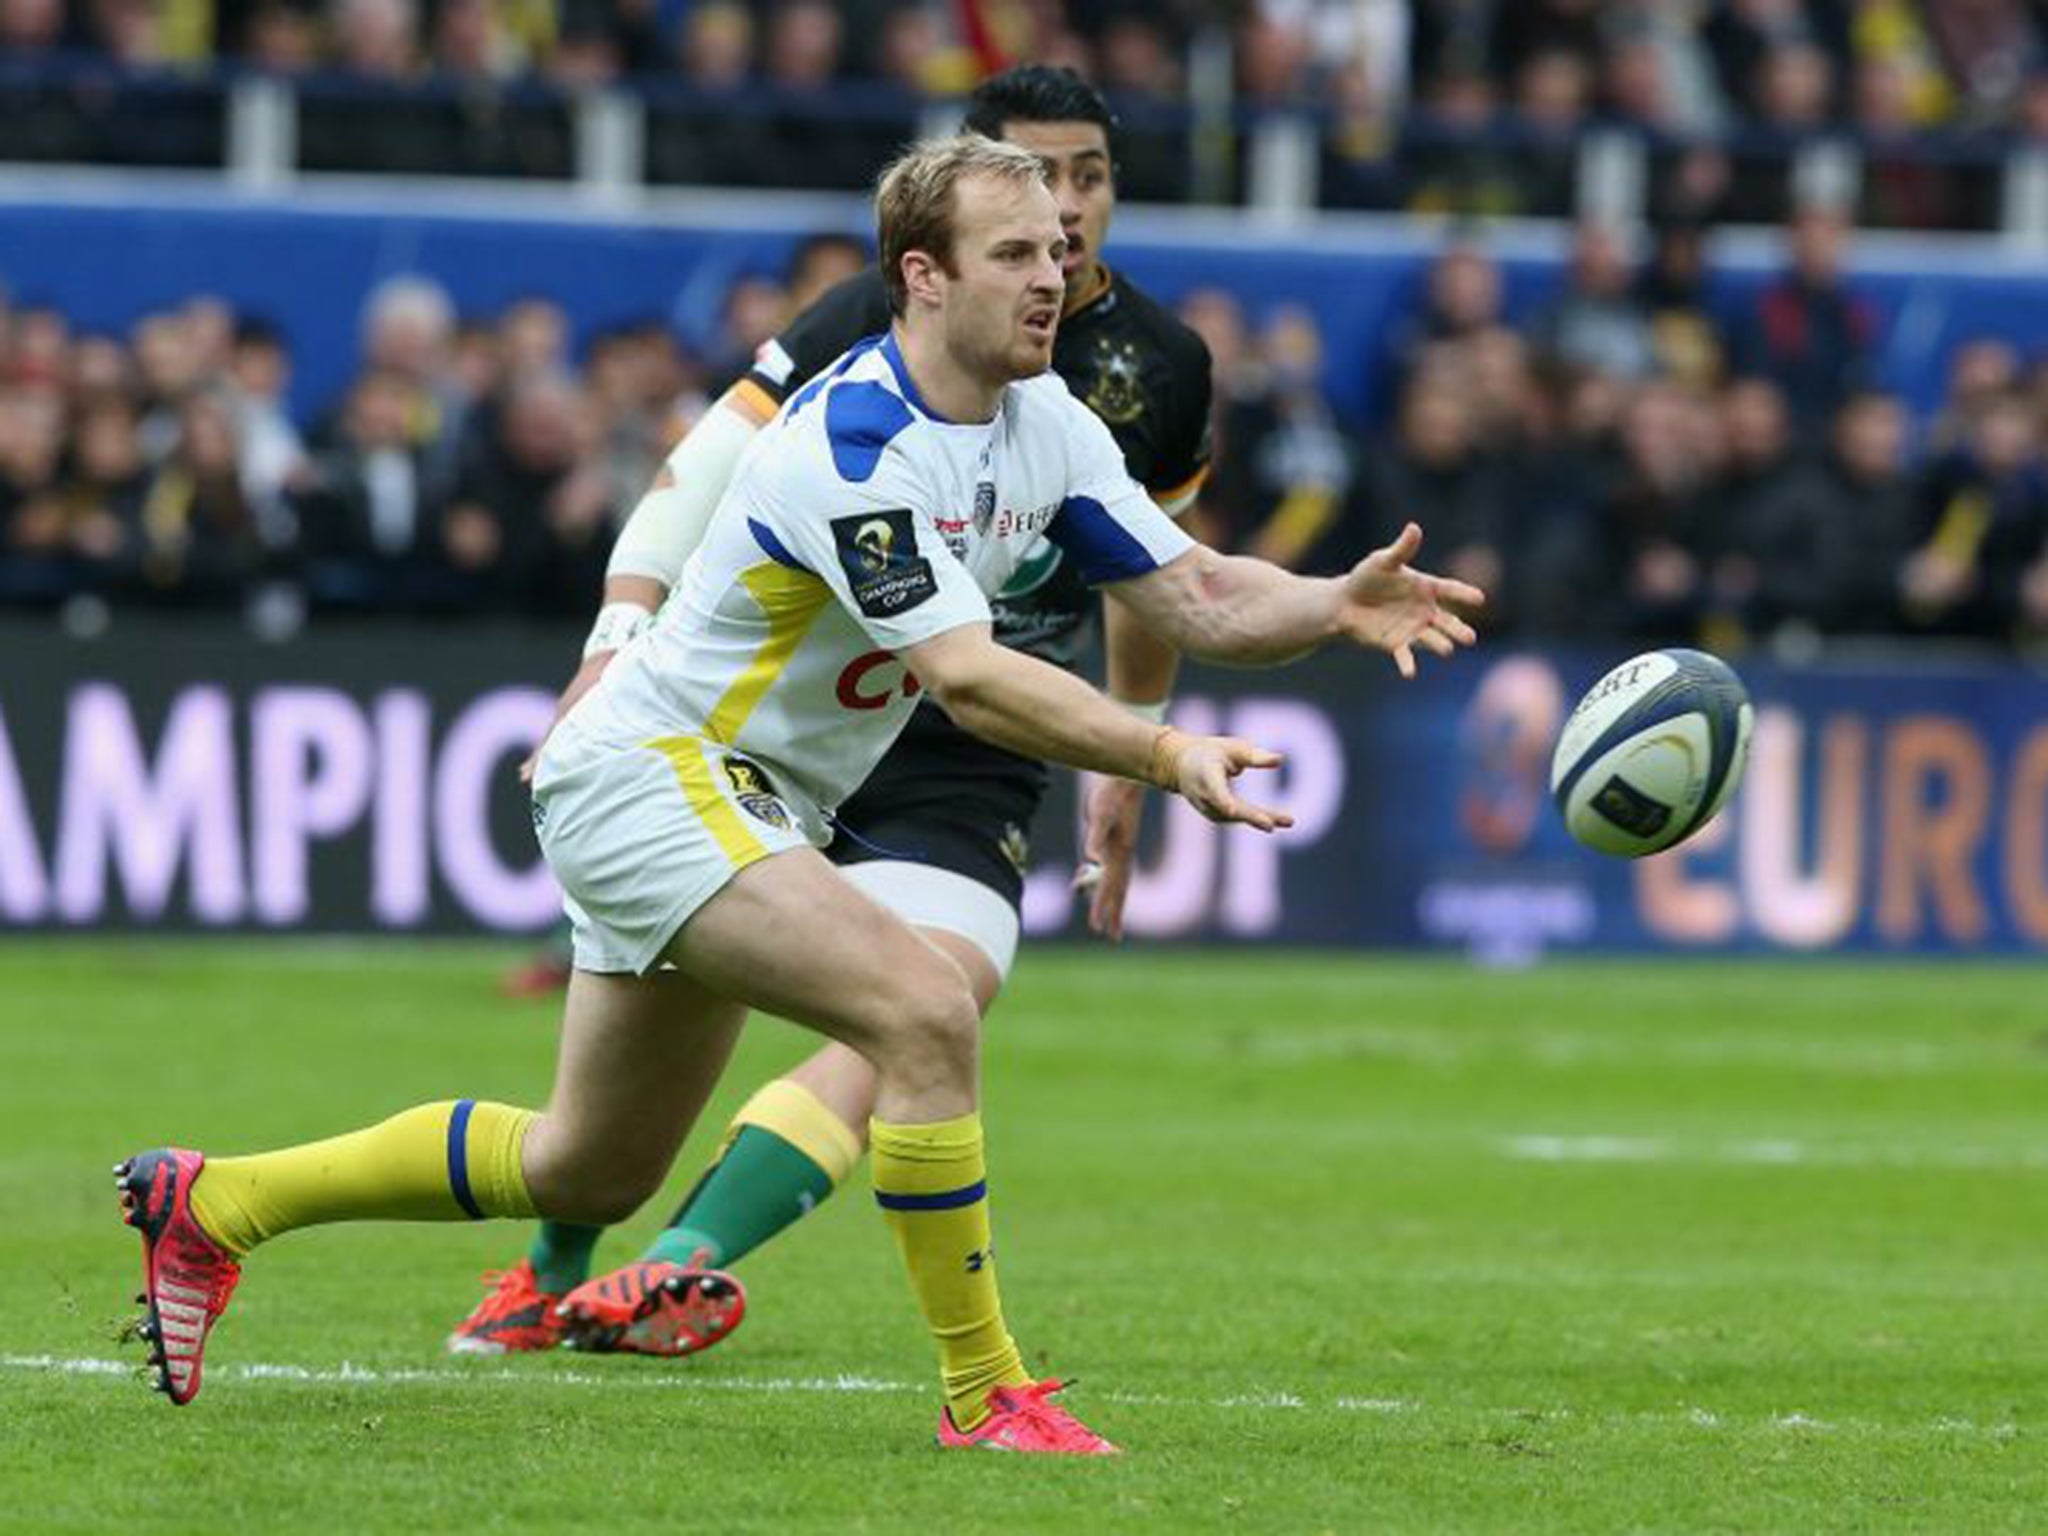 Nick Abendanon was at his swashbuckling best for Clermont